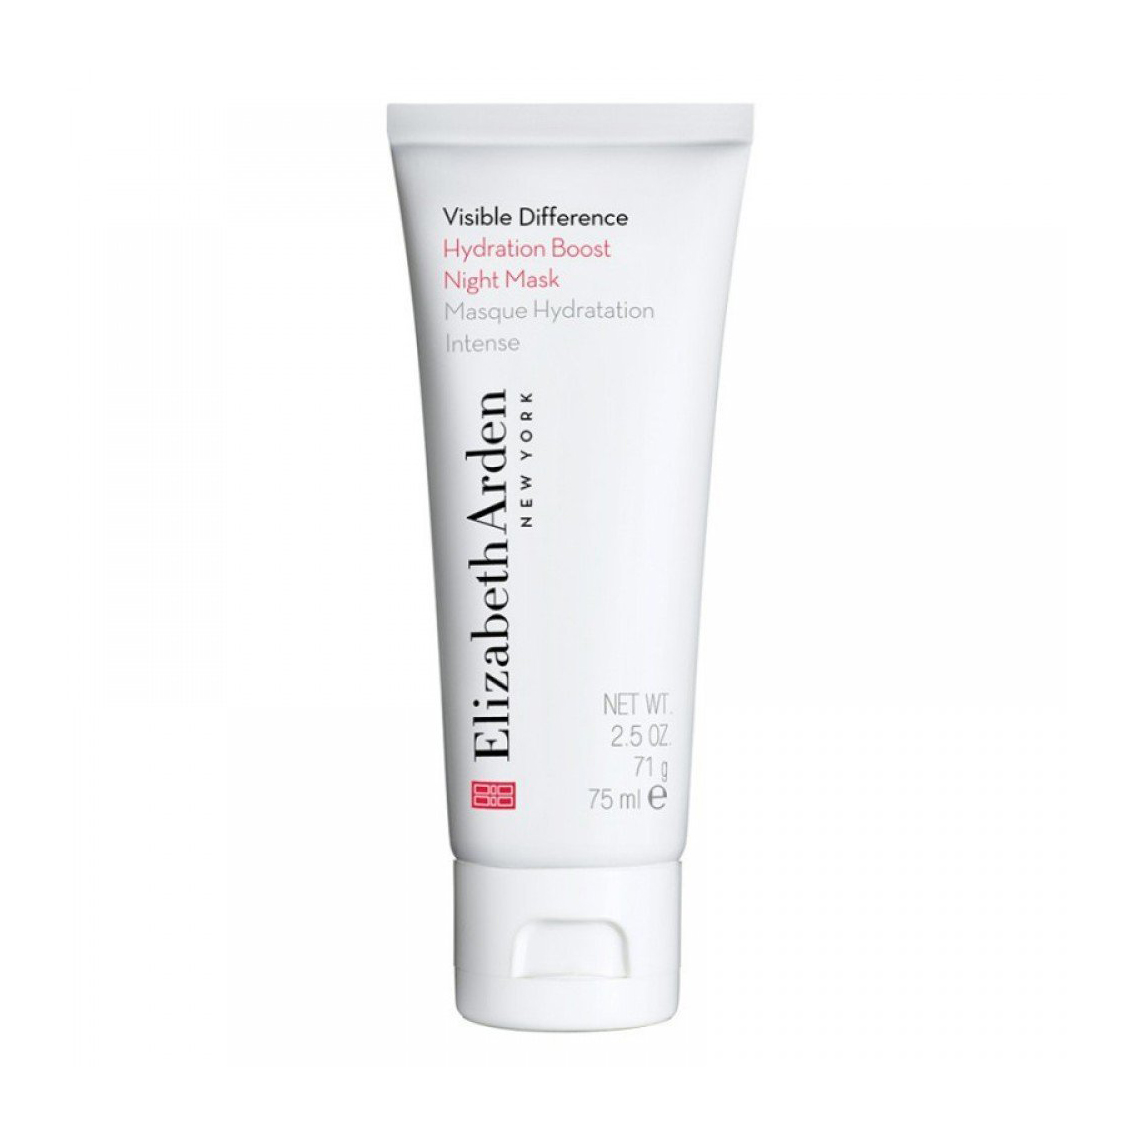 Image of Elizabeth Arden Visible Difference Hydration Boost Night Mask Maschera 75ml